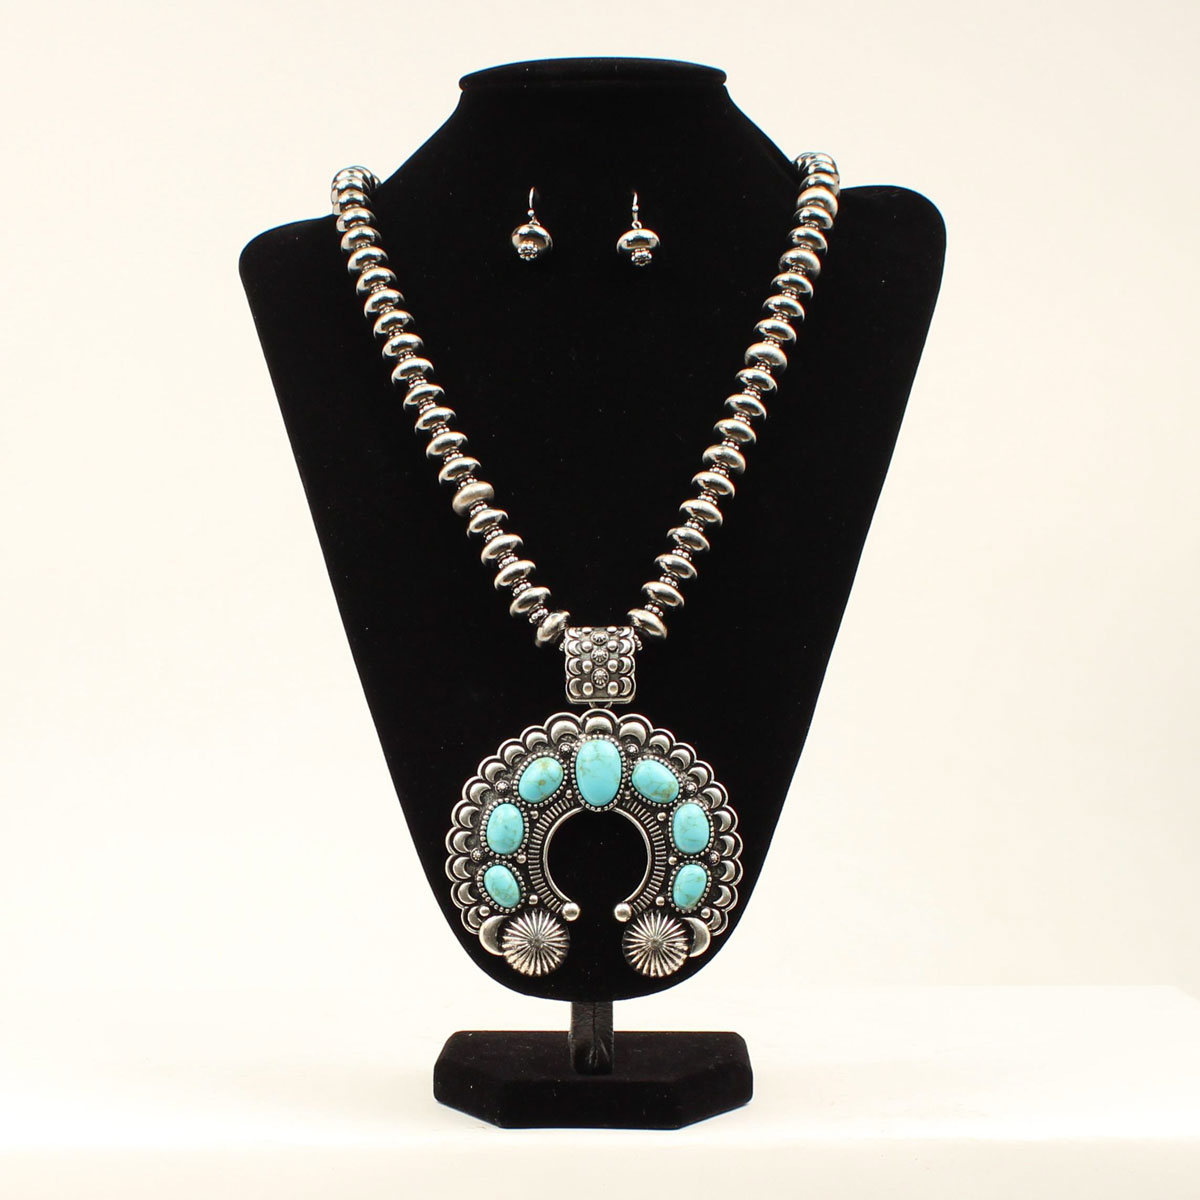 30930 Naja Style Squash Blossom With Turquoise Stones Necklace & Earring Set